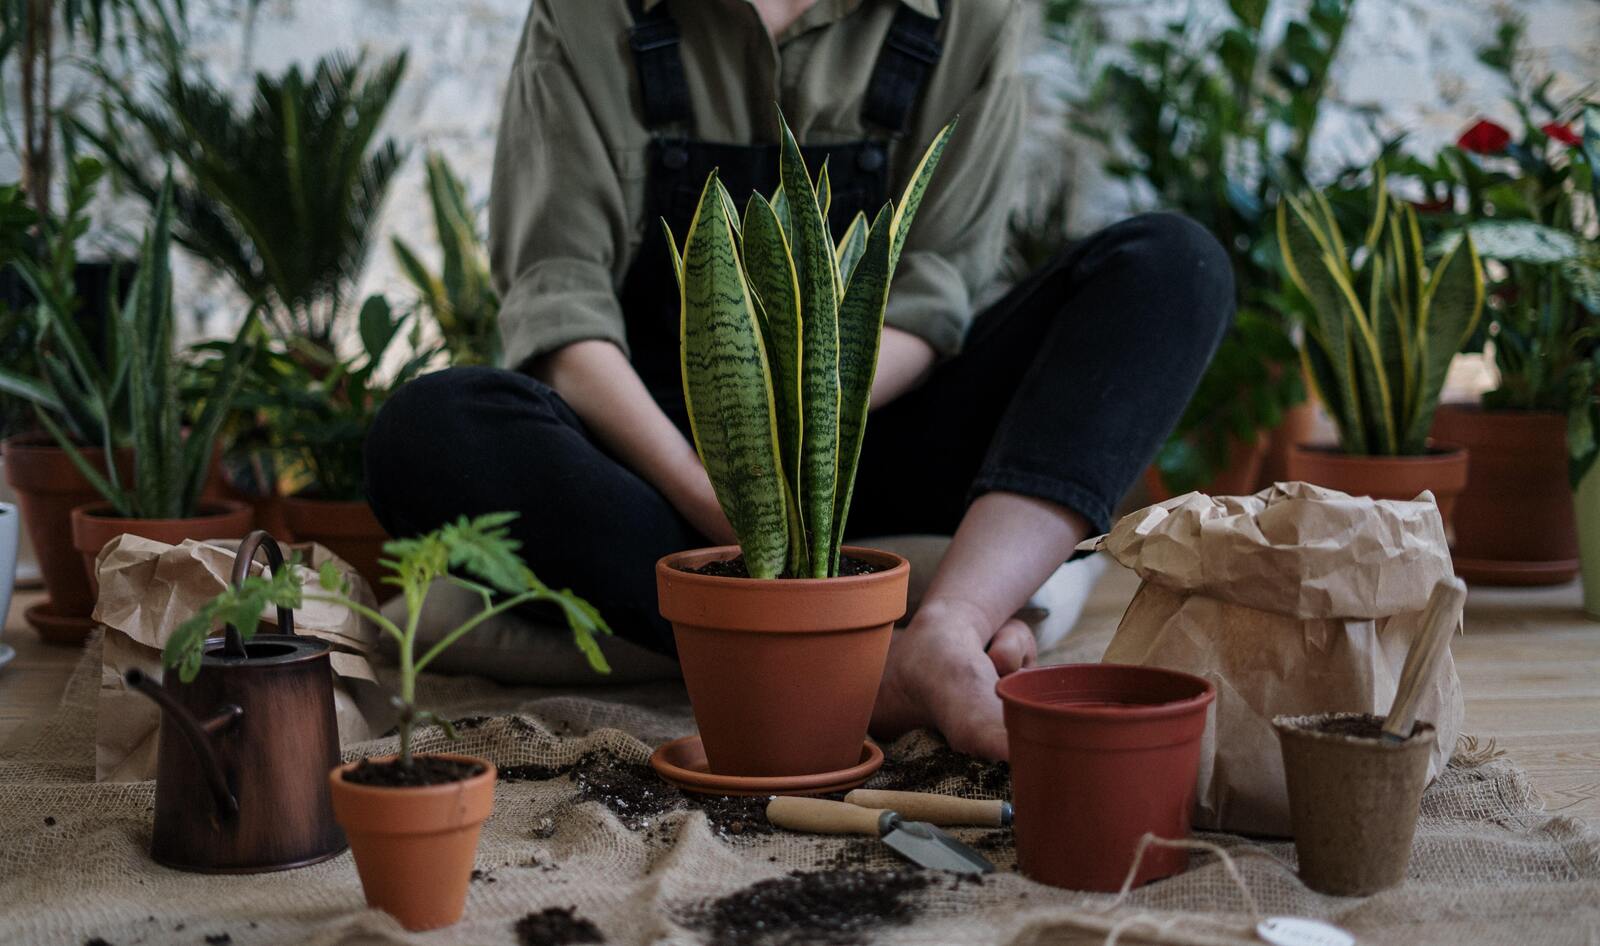 Plants Might Emit 'Distress' Sounds, But Does This Mean They Can Actually Feel Pain?&nbsp;